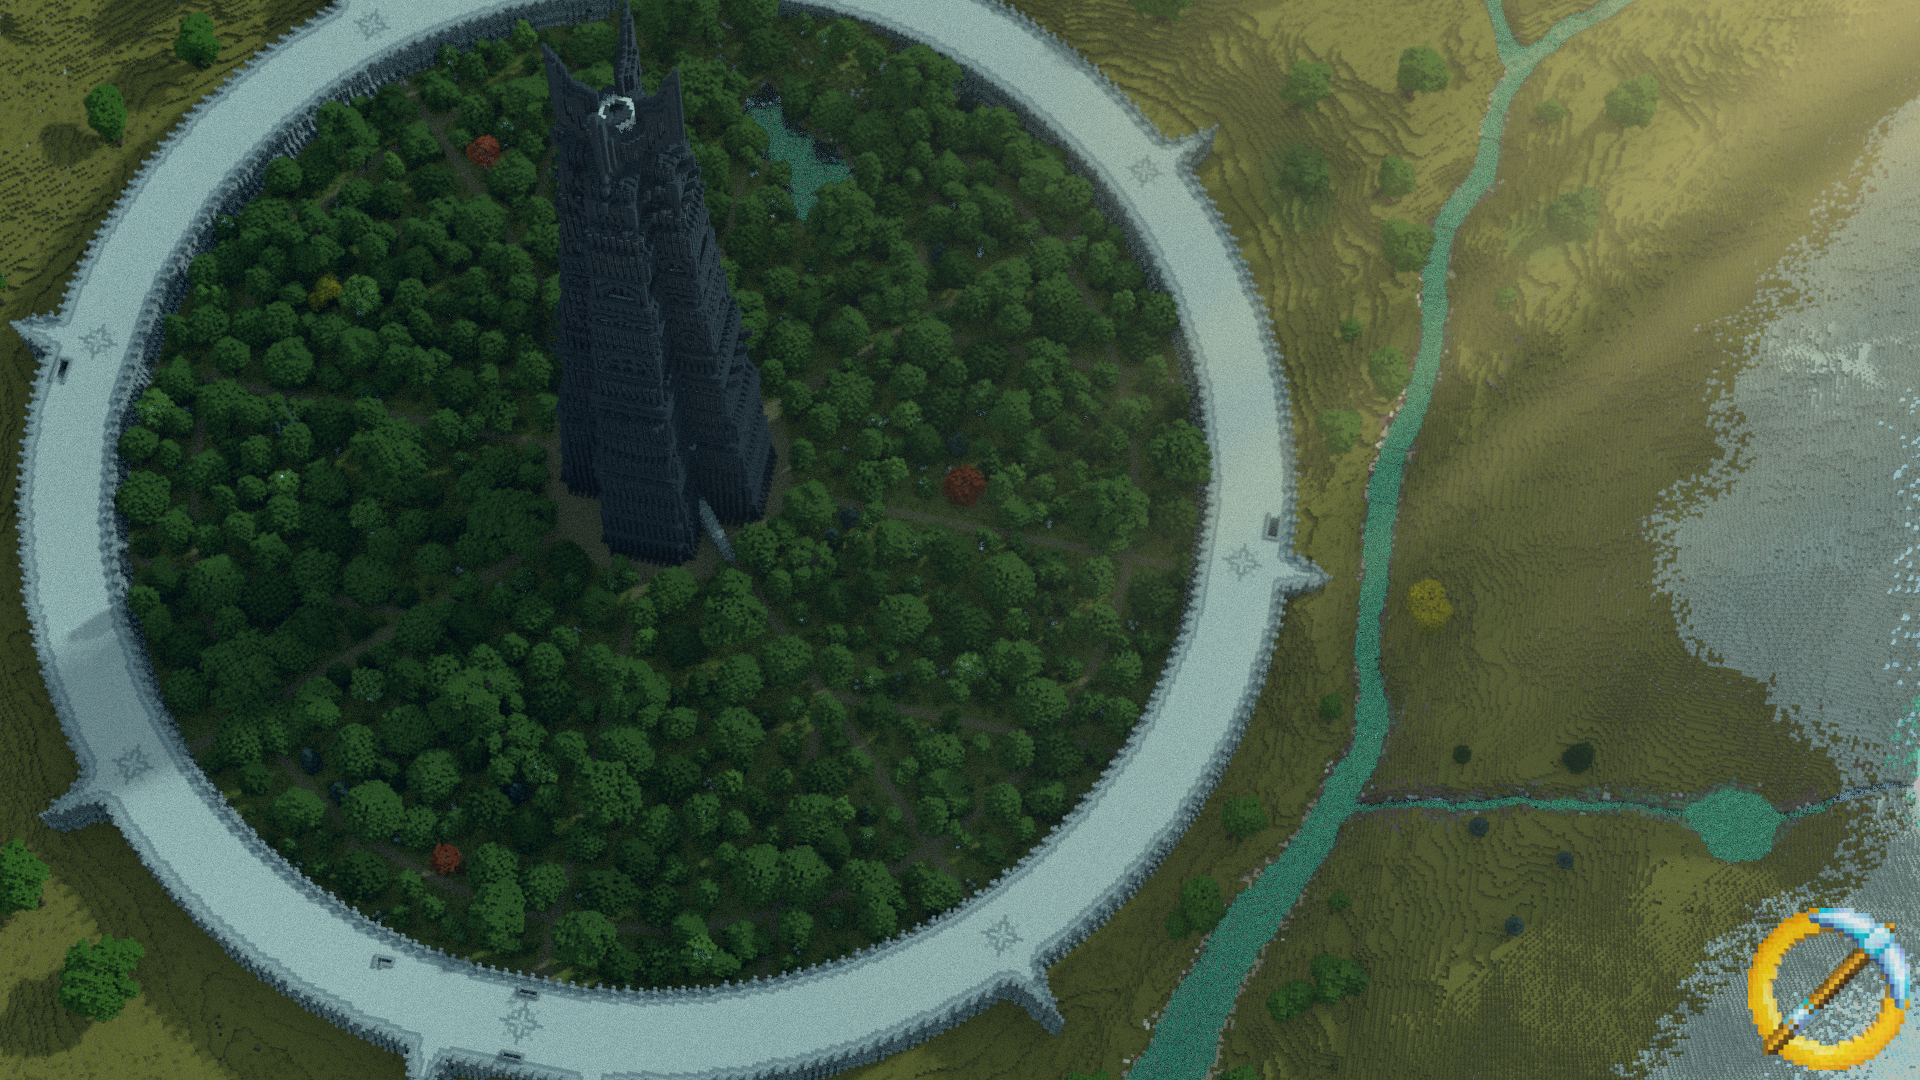 The ring of Isengard